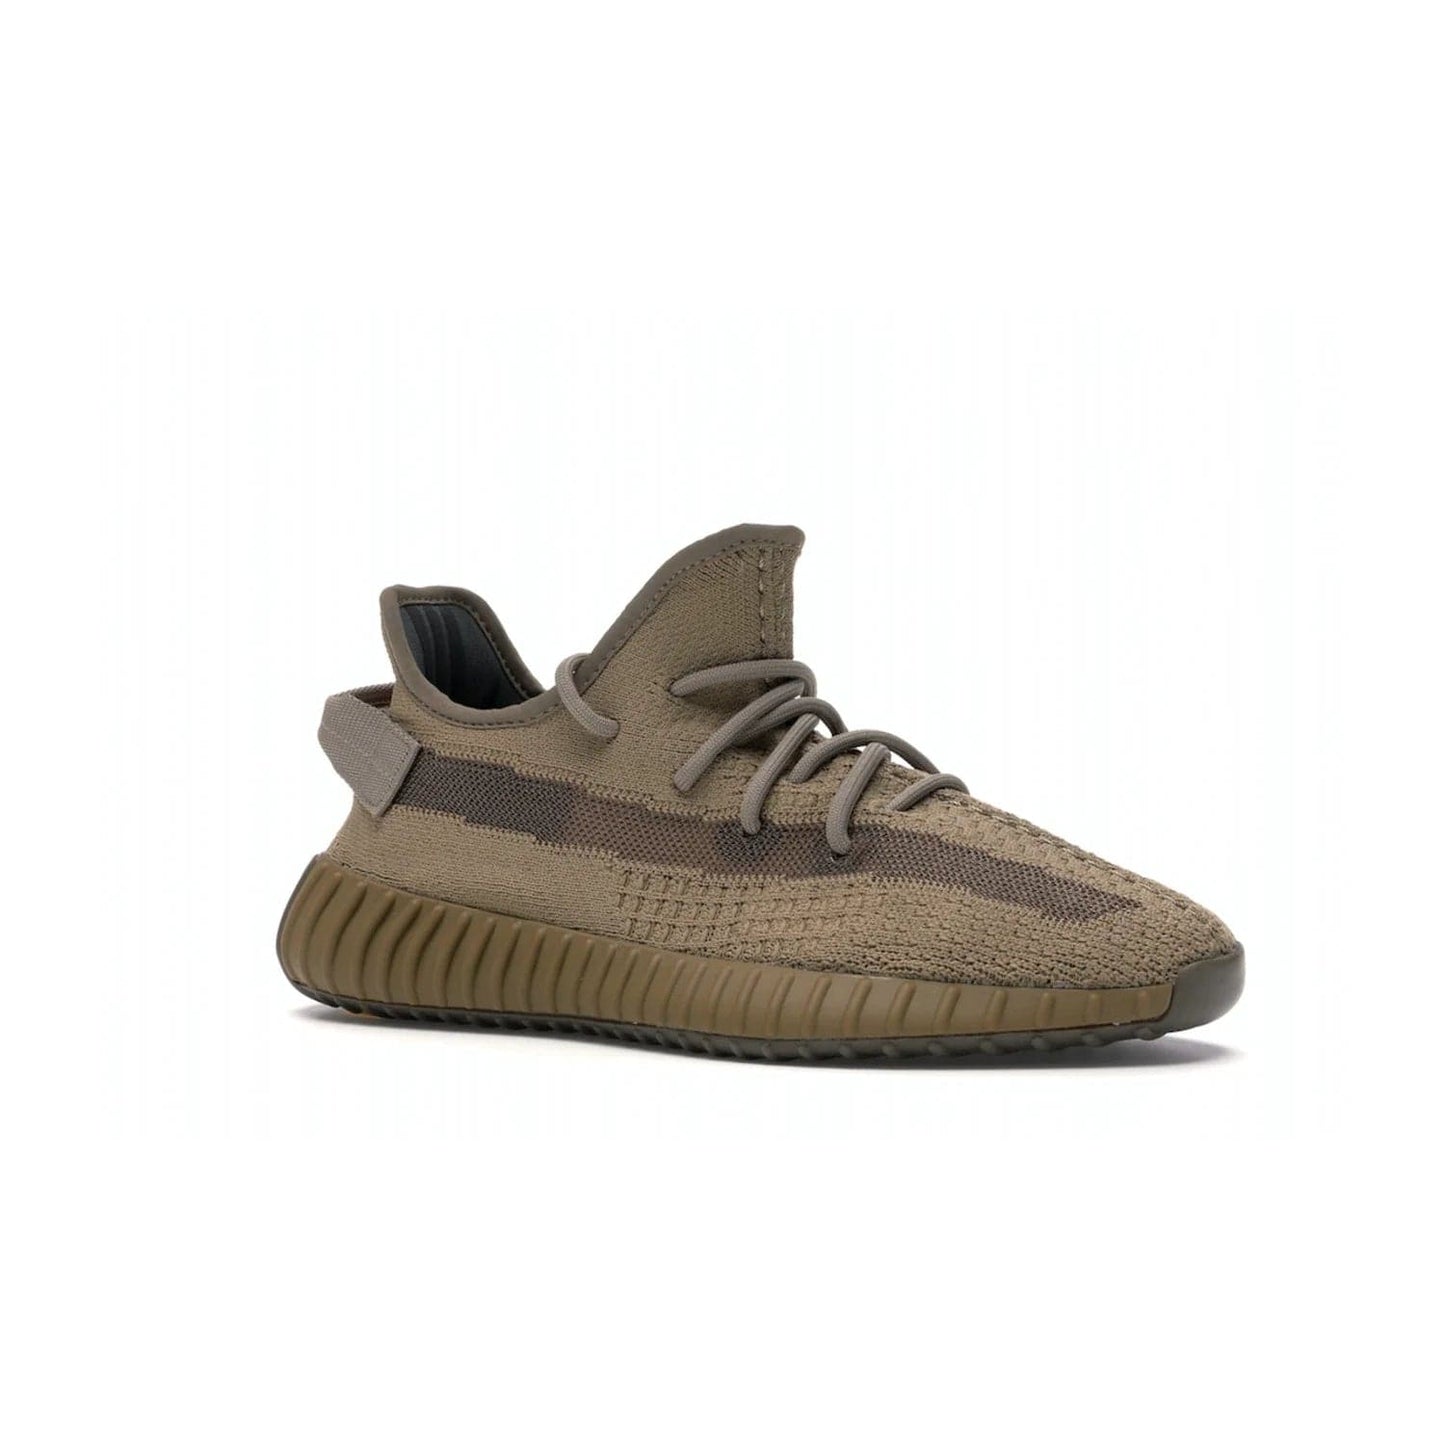 adidas Yeezy Boost 350 V2 Earth - Image 4 - Only at www.BallersClubKickz.com - Abstract style with the adidas Yeezy Boost 350 V2 Earth. Crafted with mud Primeknit upper, mud Boost and interior, and a translucent side stripe. Regional exclusive in Earth/Earth/Earth colorway, these fashionable sneakers released in February 2020. Showcase your style with the Yeezy 350 V2 Earth.